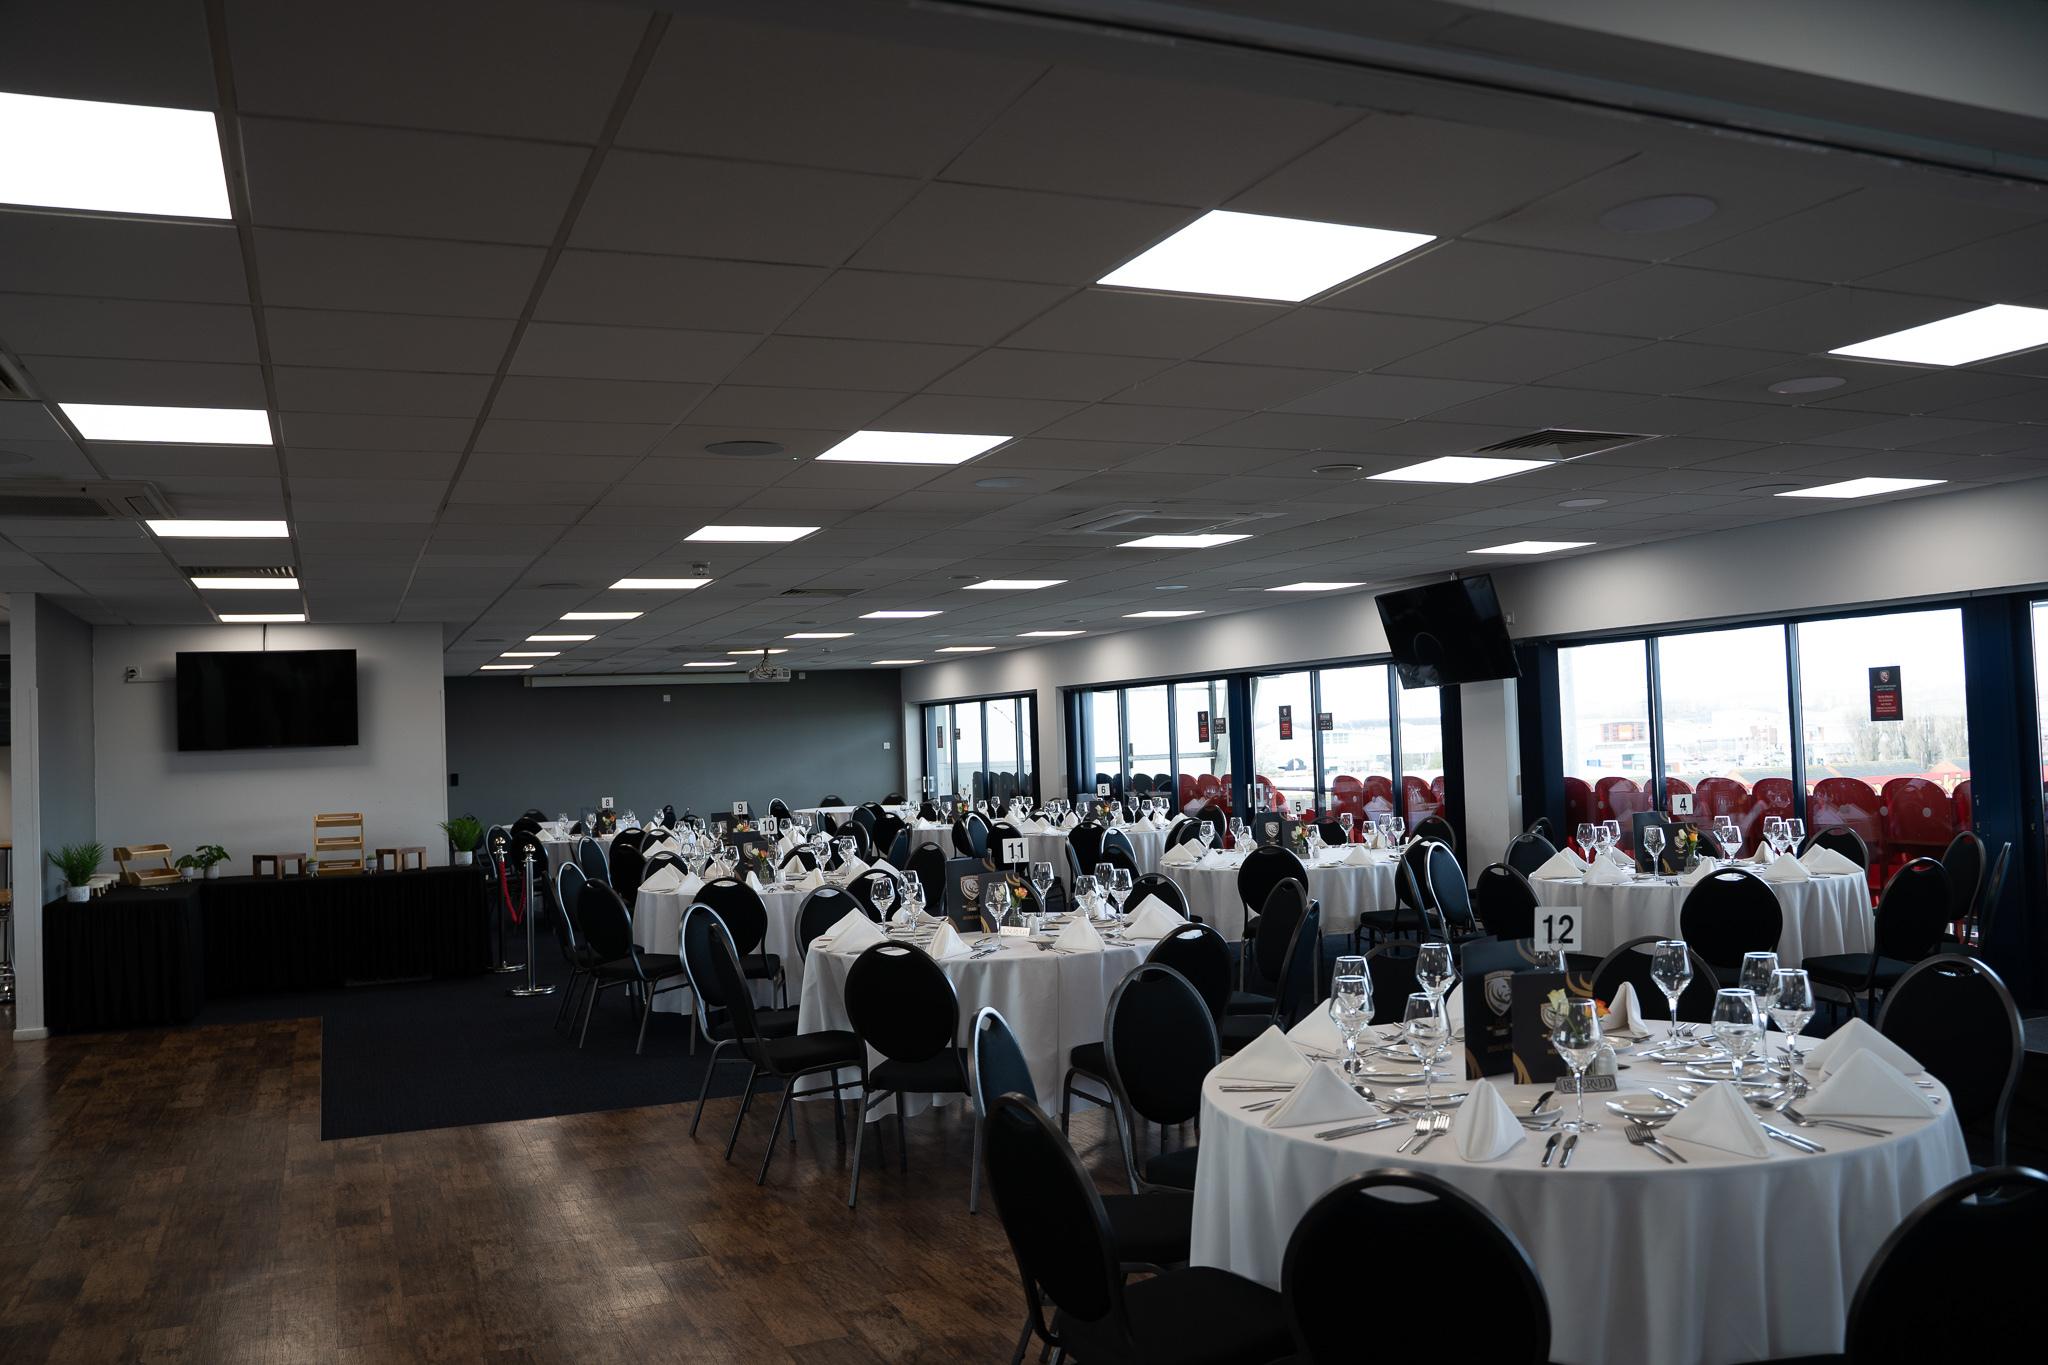 Captains Lounge, Gloucester Rugby Club: Kingsholm Stadium photo #2